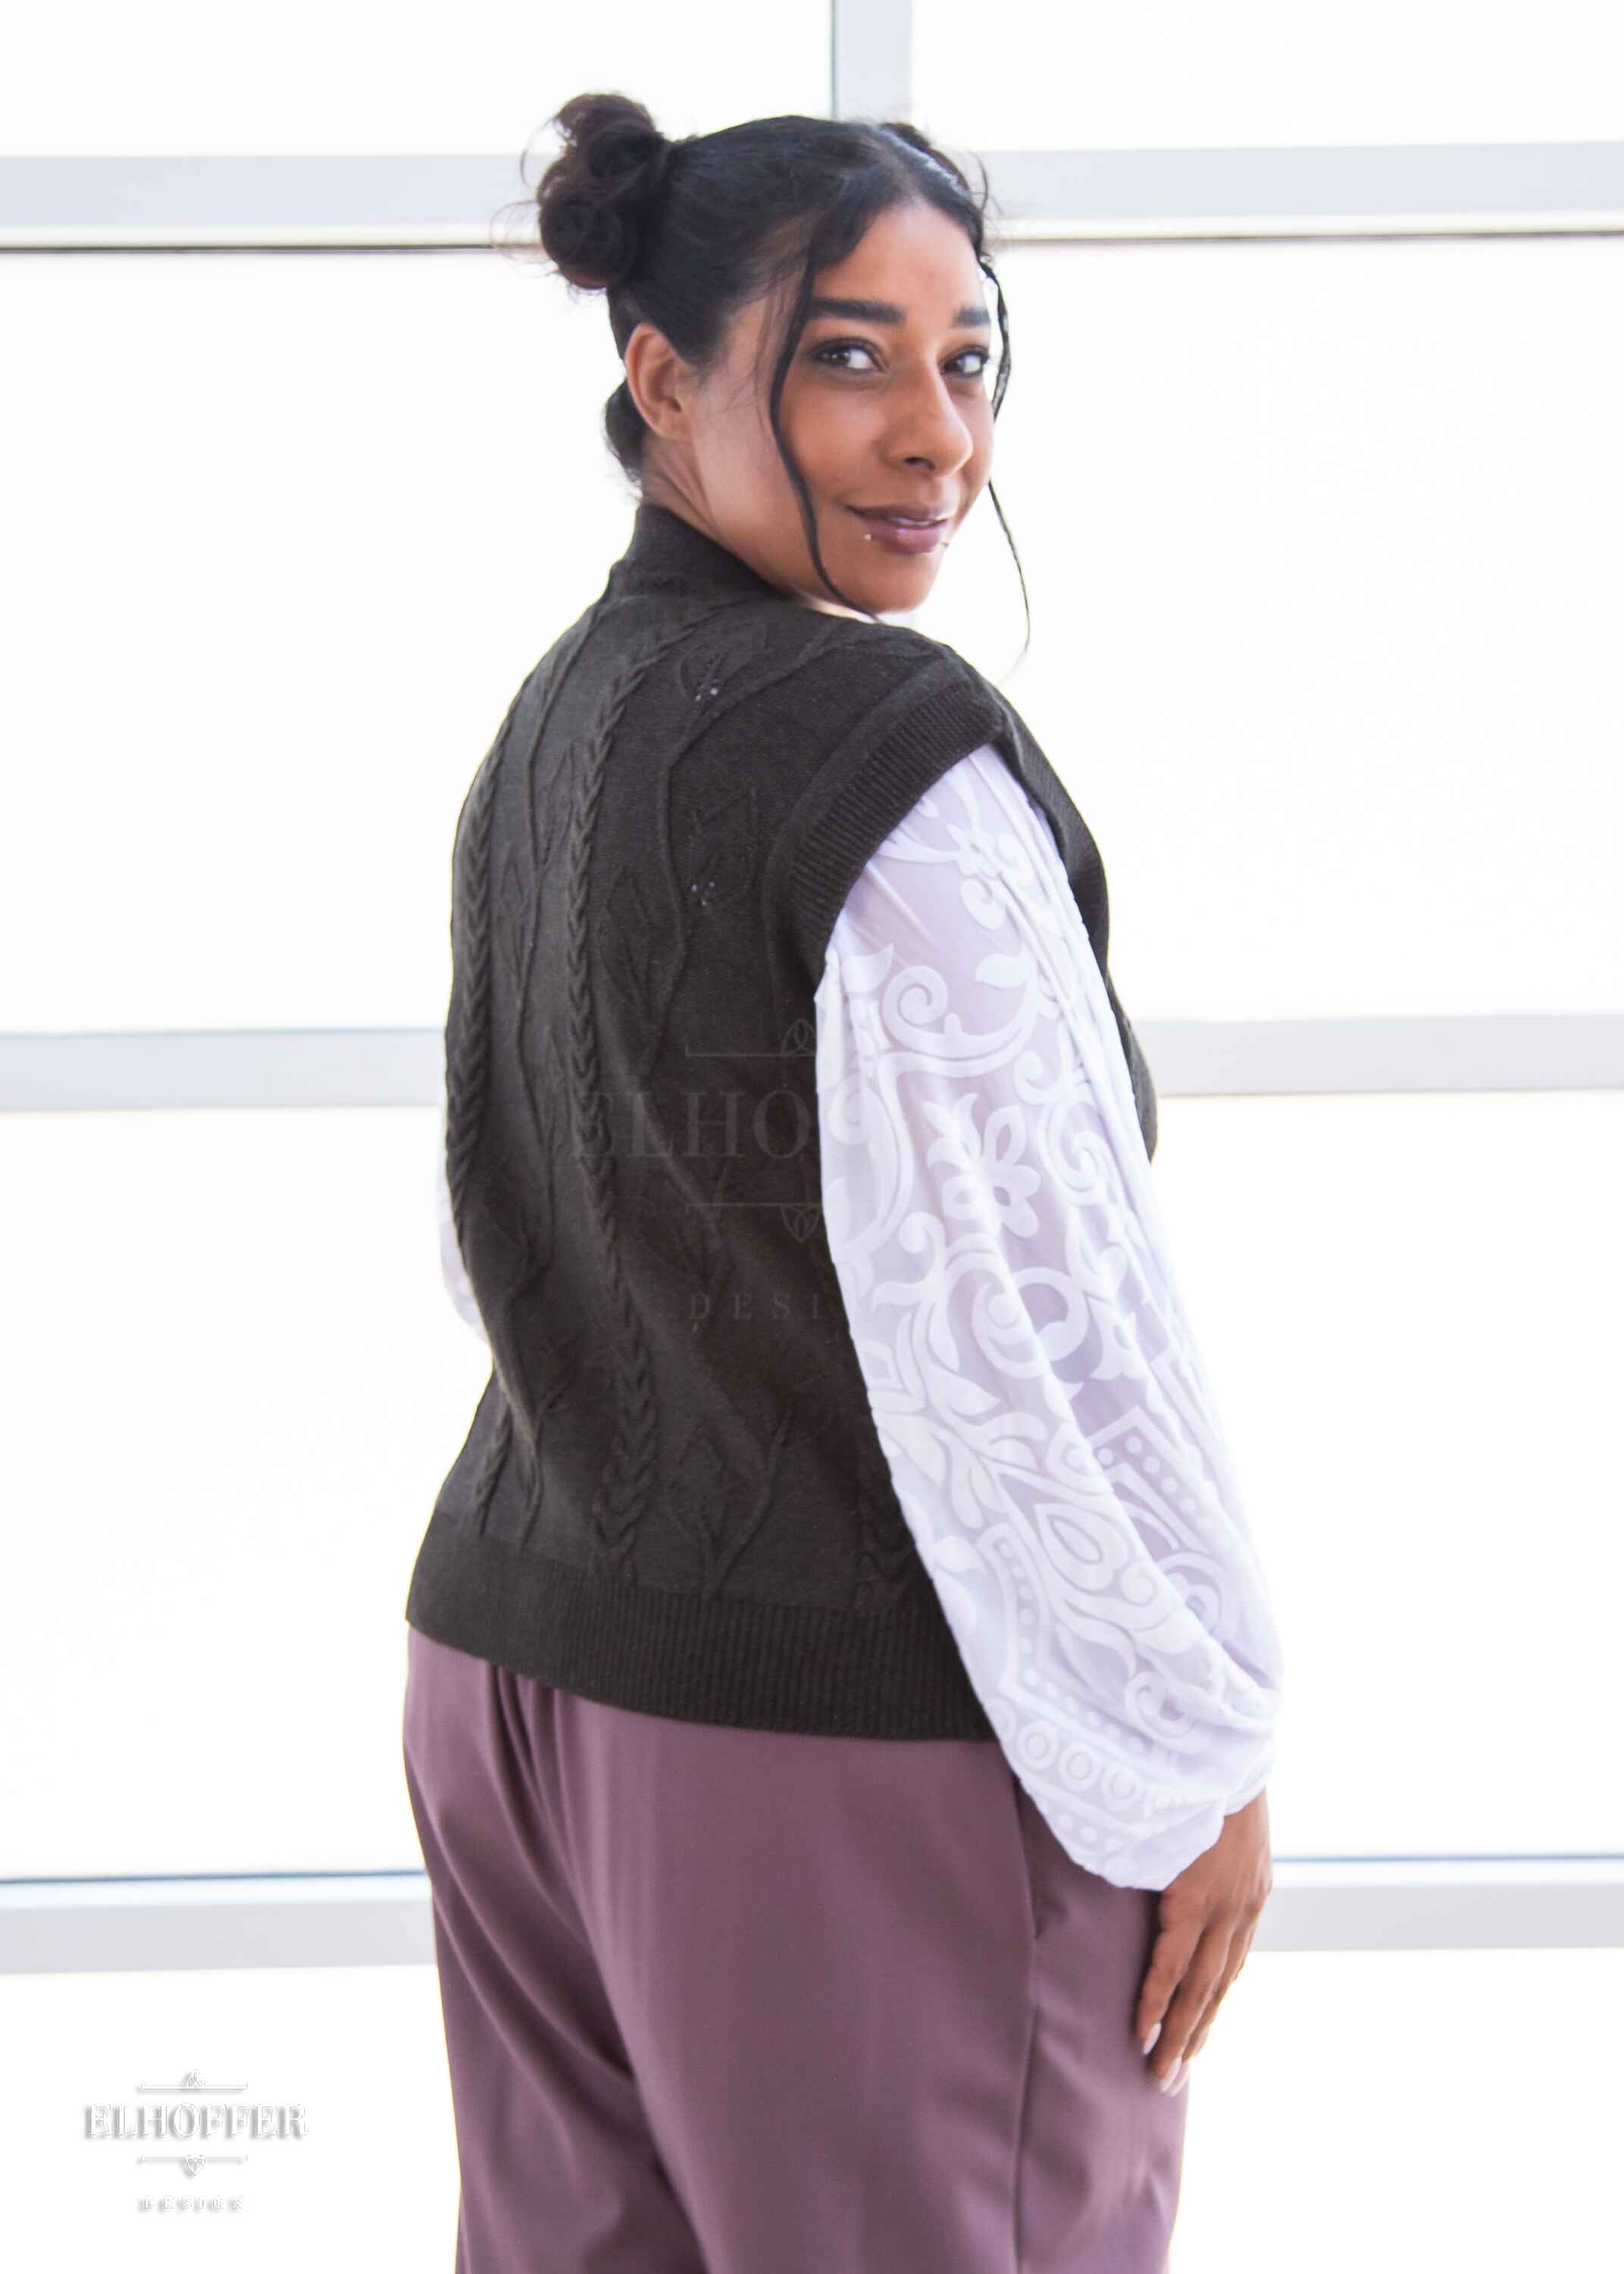 Janae is modeling the Sample M (L-2XL). She has a 40” Bust, 35” Waist, 43” Hips, and is 5’7”.